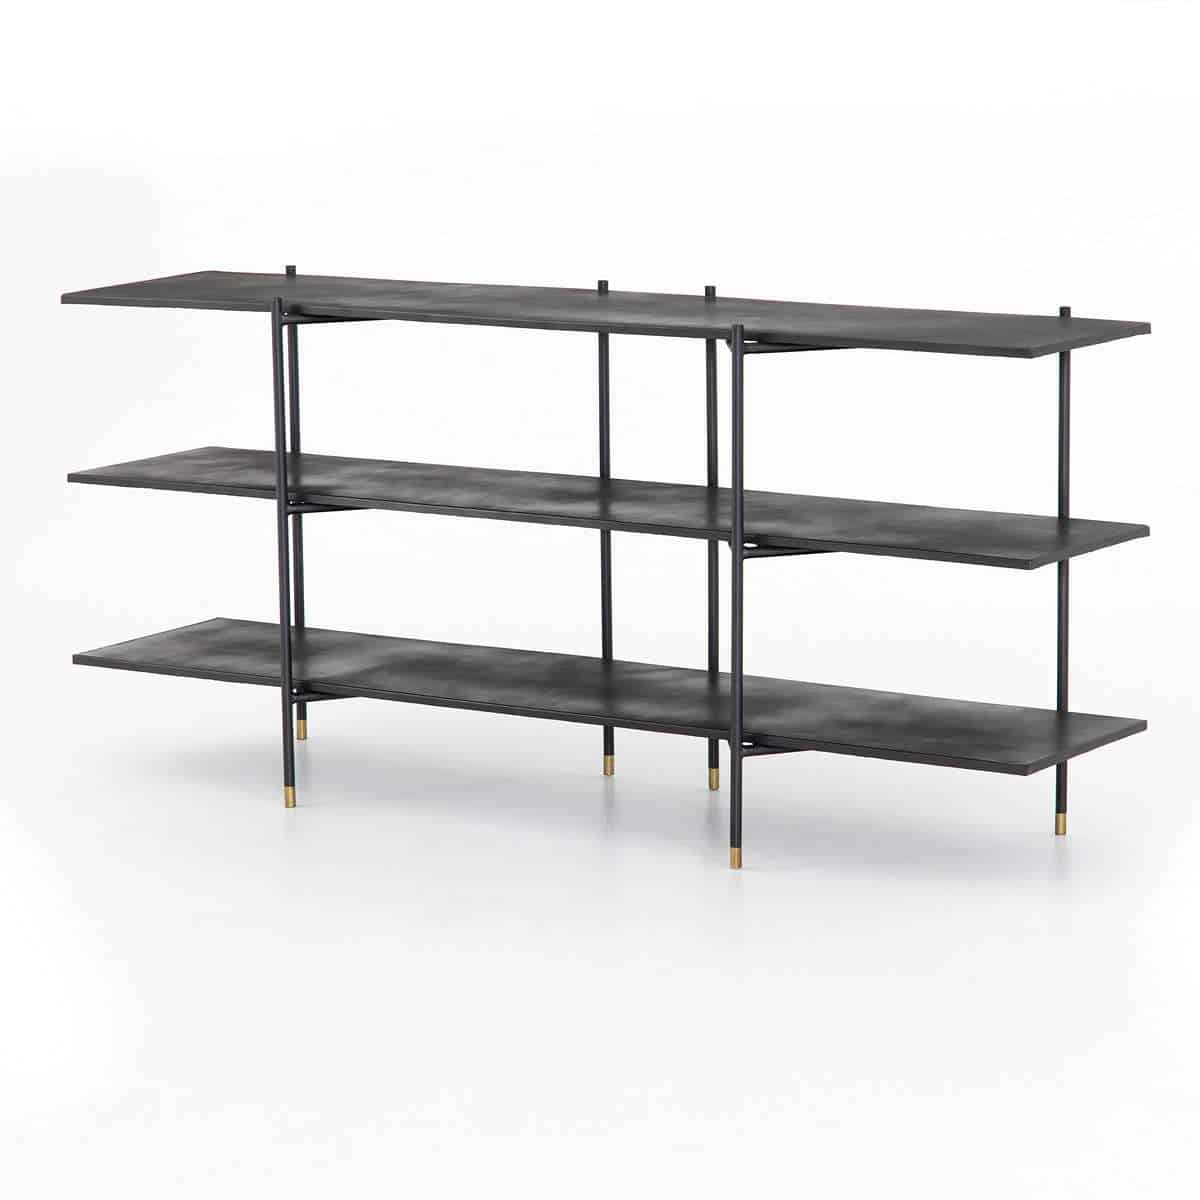 Vito Media Console by Four Hands